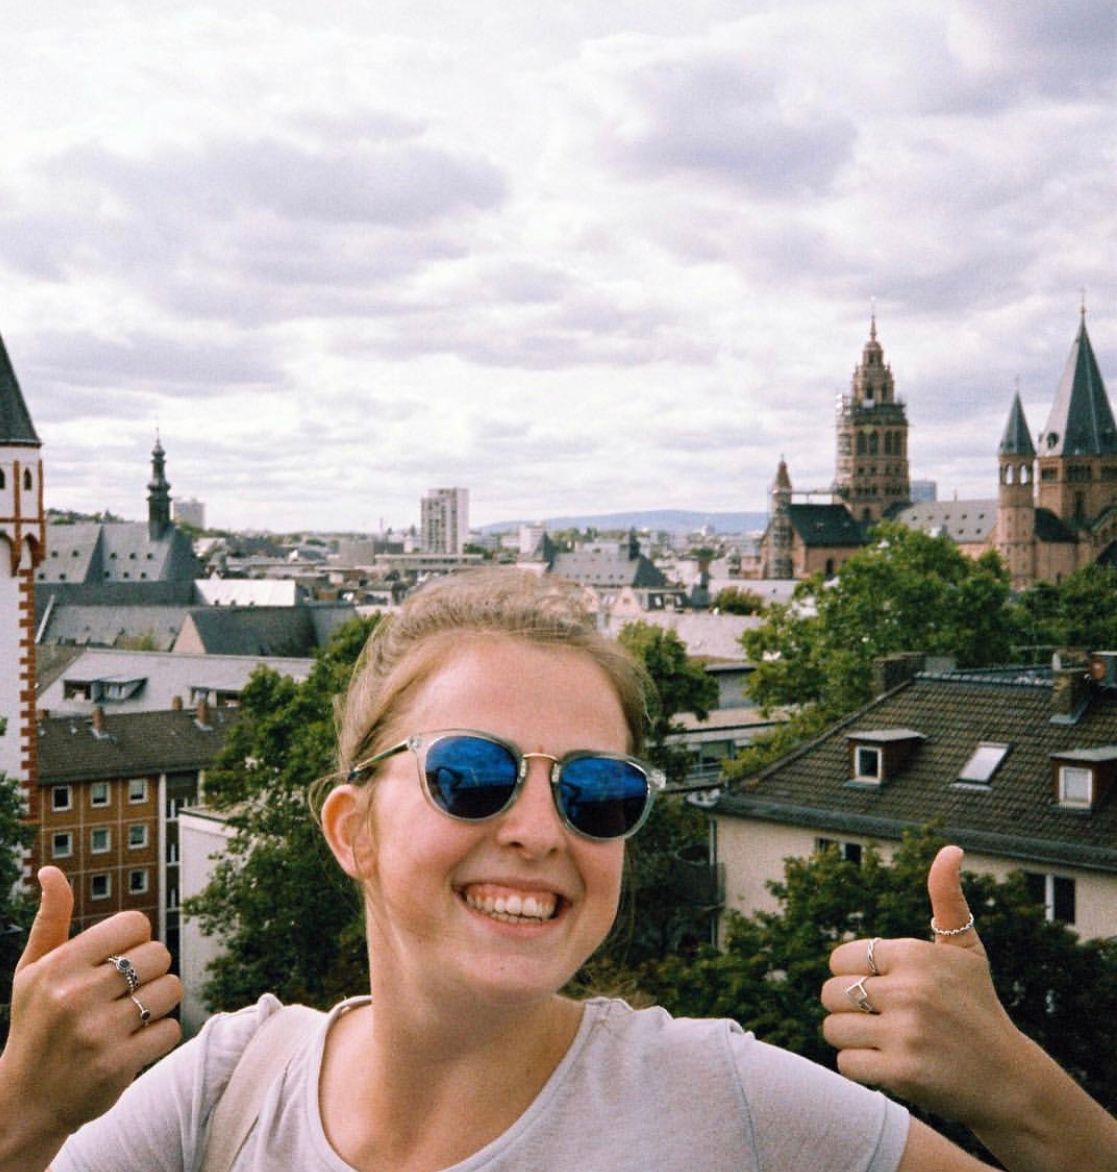 Female smiling at the camera with both thumbs up and the Germany city scape in the background